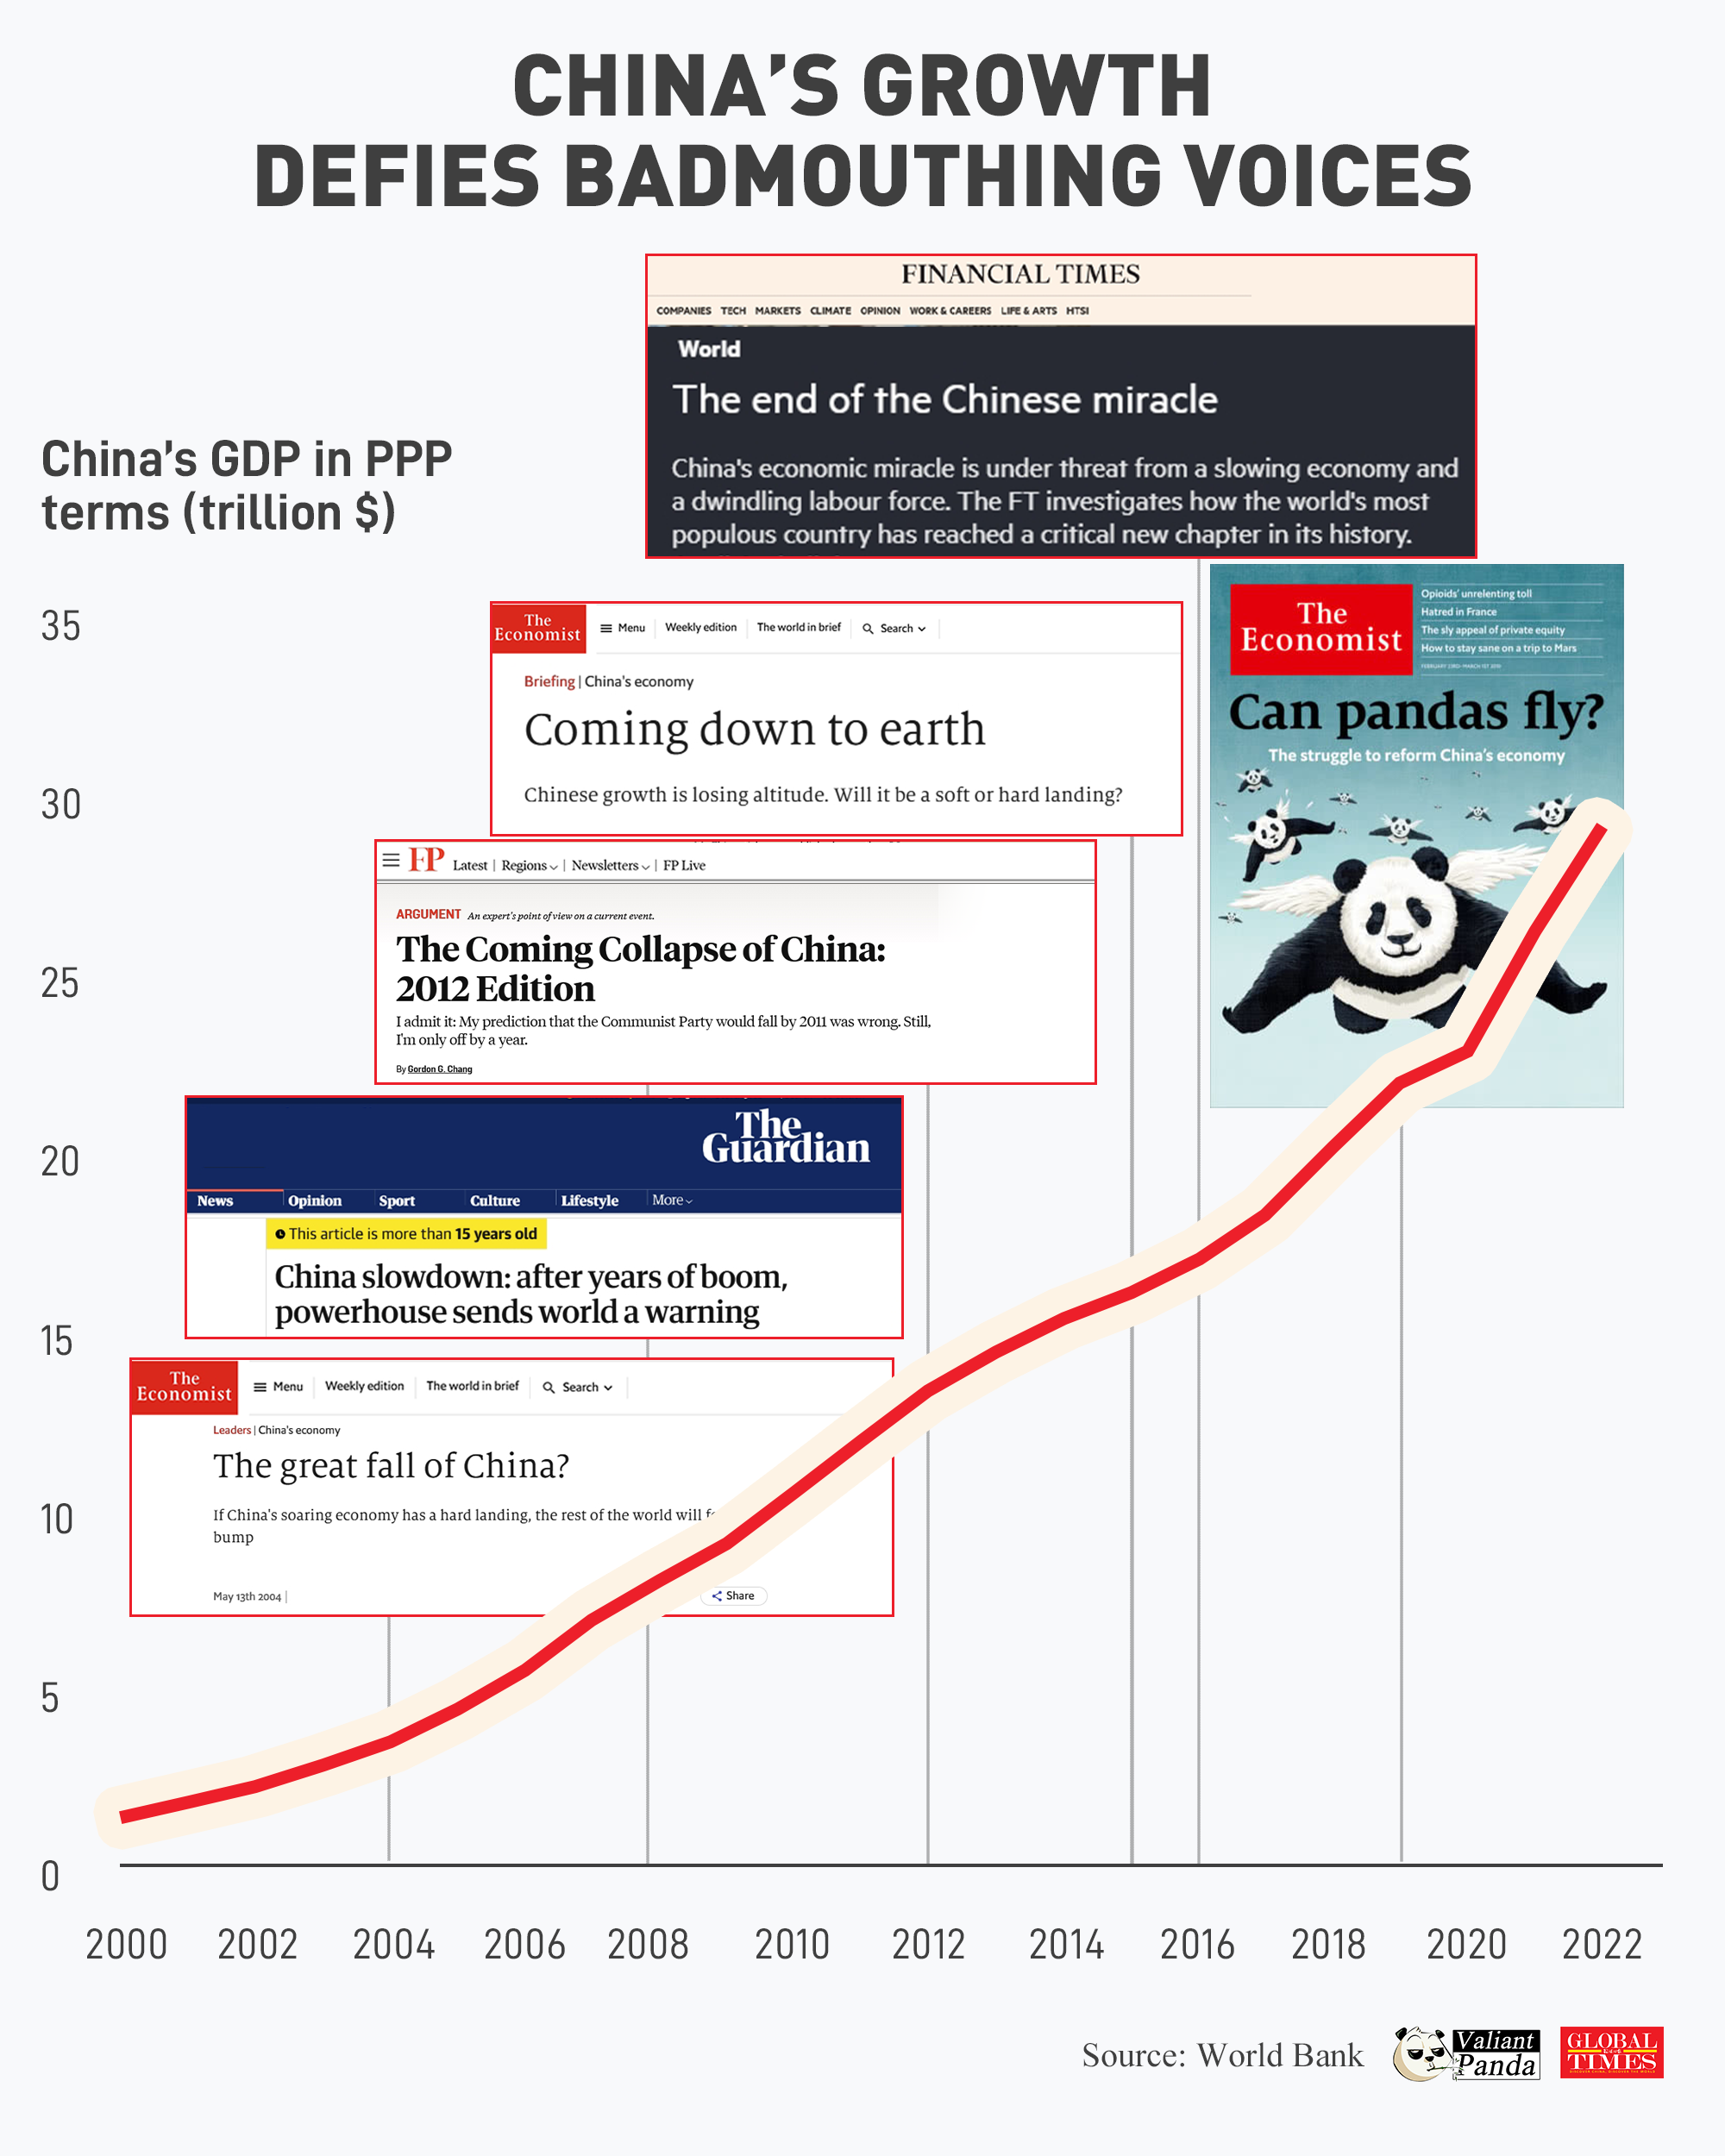 Western media reports have been badmouthing the Chinese economy for decades. But China's economy keeps rising, defying the doomsayers' voices. Graphic:GT 